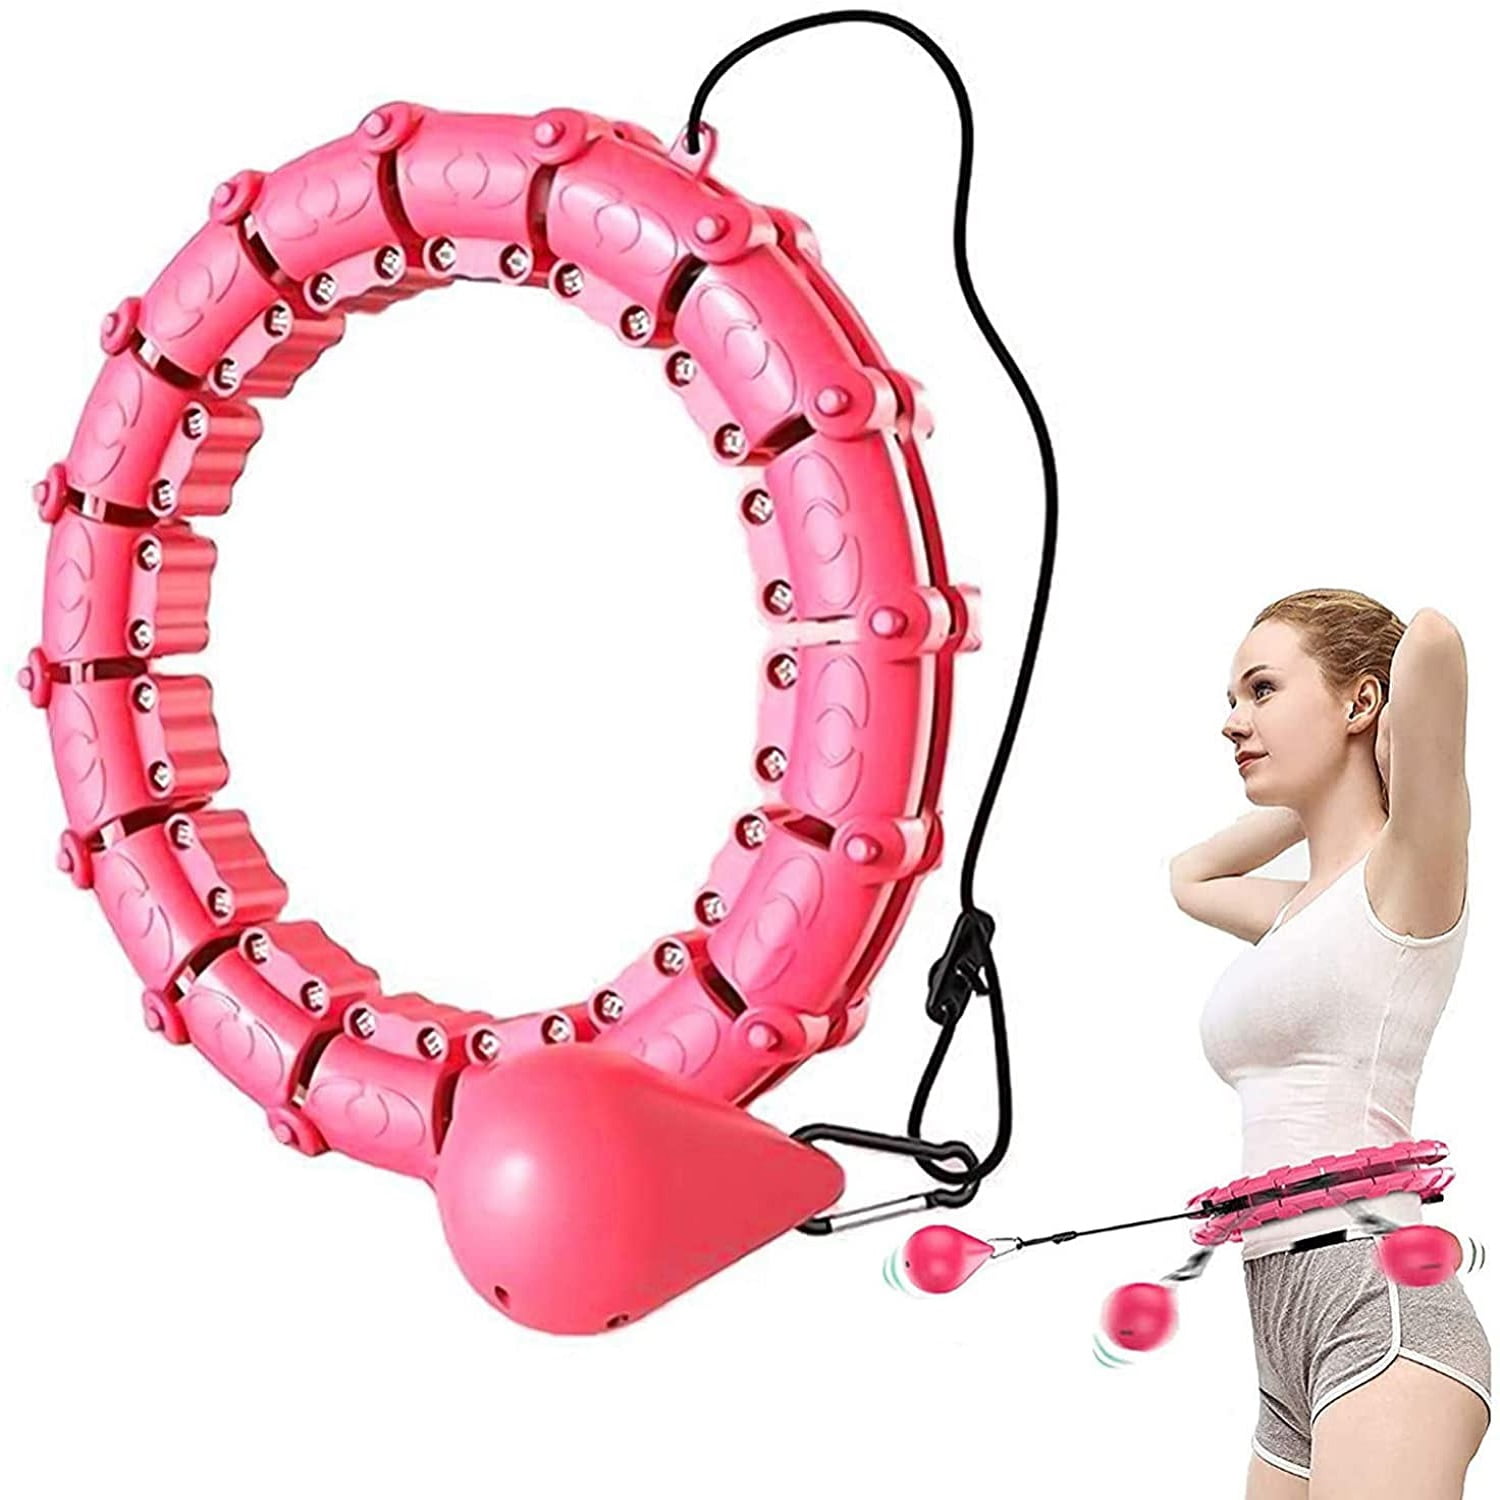 Weighted Infinity Smart Hoop for Adults Weight Loss for Adults/Beginner Fitness Aids 24 Detachable Knots Adjustable Weight Auto-Spinning Ball 2 in 1 Fitness and Massage 